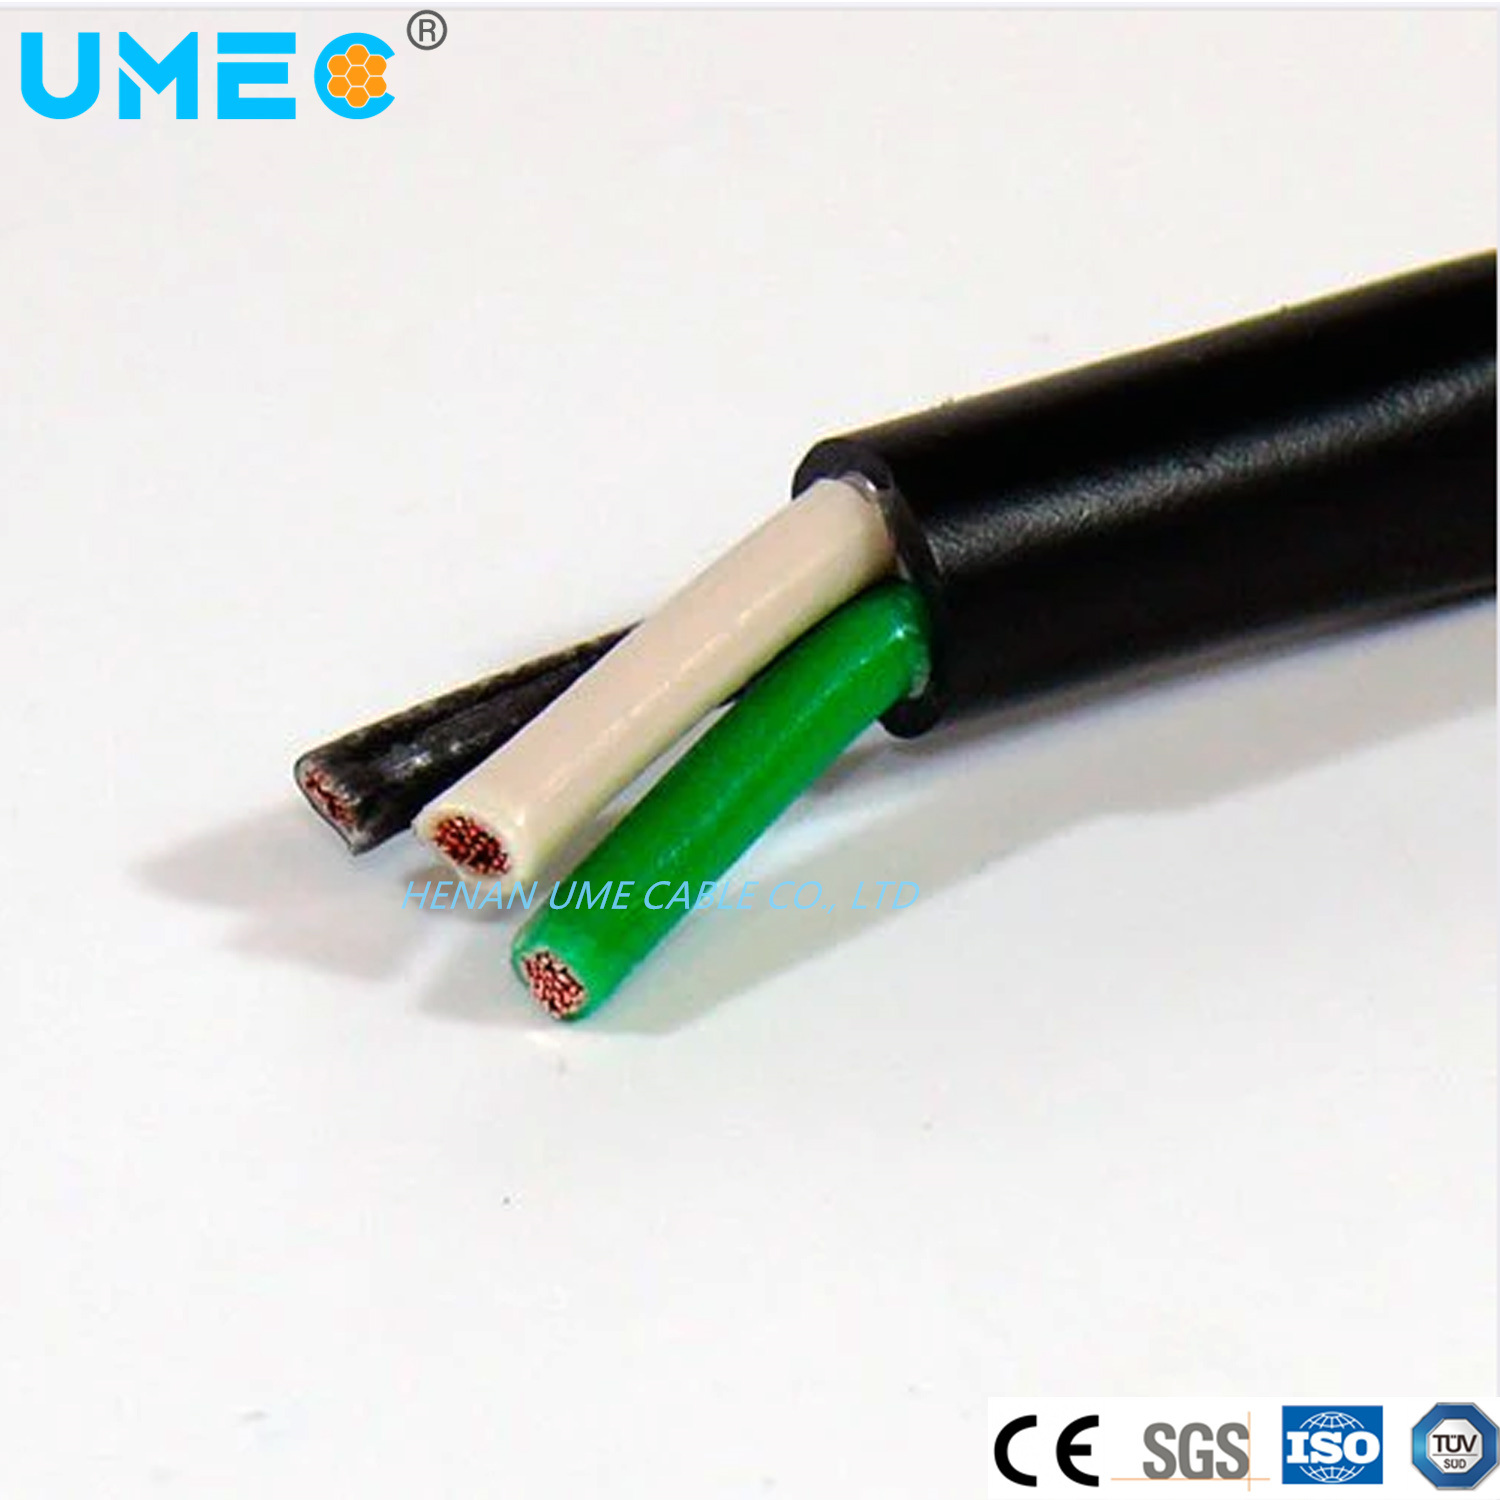 
                B174 Standard Customized Tsj Tsj-N Thhn Thwn Portable Power Cord Outdoor Durable Flexible Wire Cable 600V
            